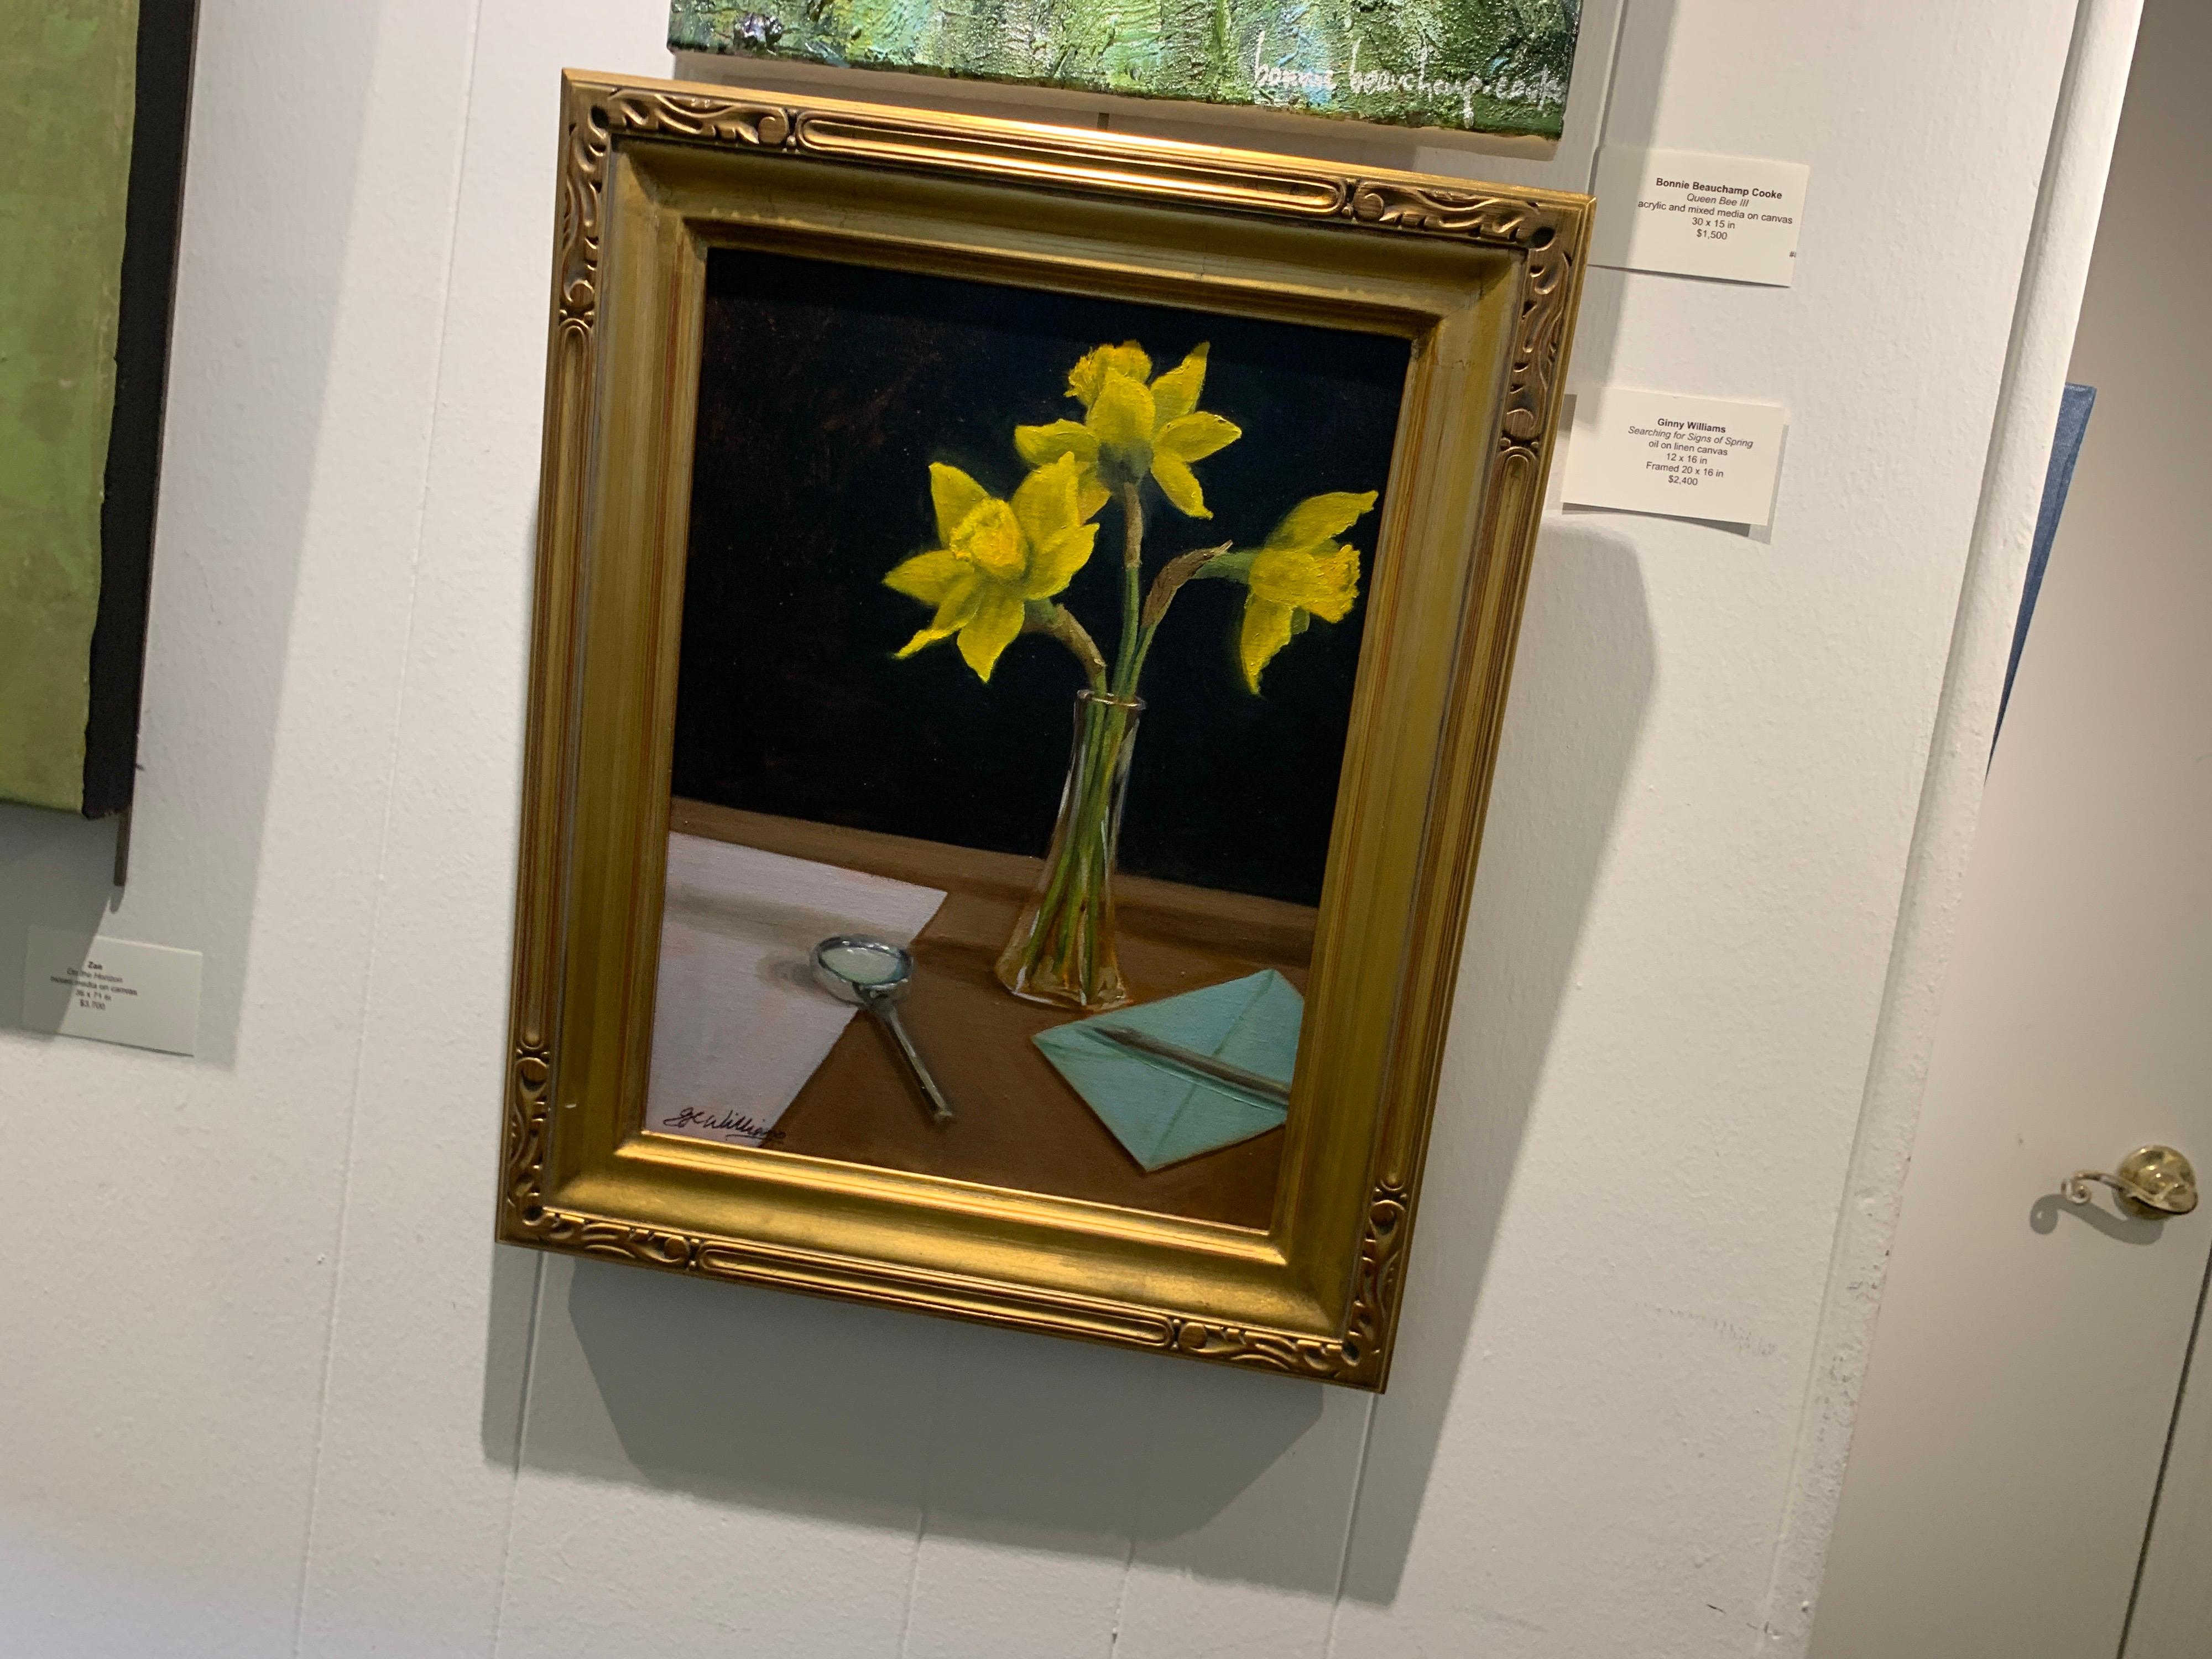 Set inside a gilt molded frame, this oil on linen still-life painting is signed lower right. Without its frame, it measures 16 x 12 inches.

We were immediately drawn to the thoughtfully painted work, the clever titles and the rich, deep hues. And